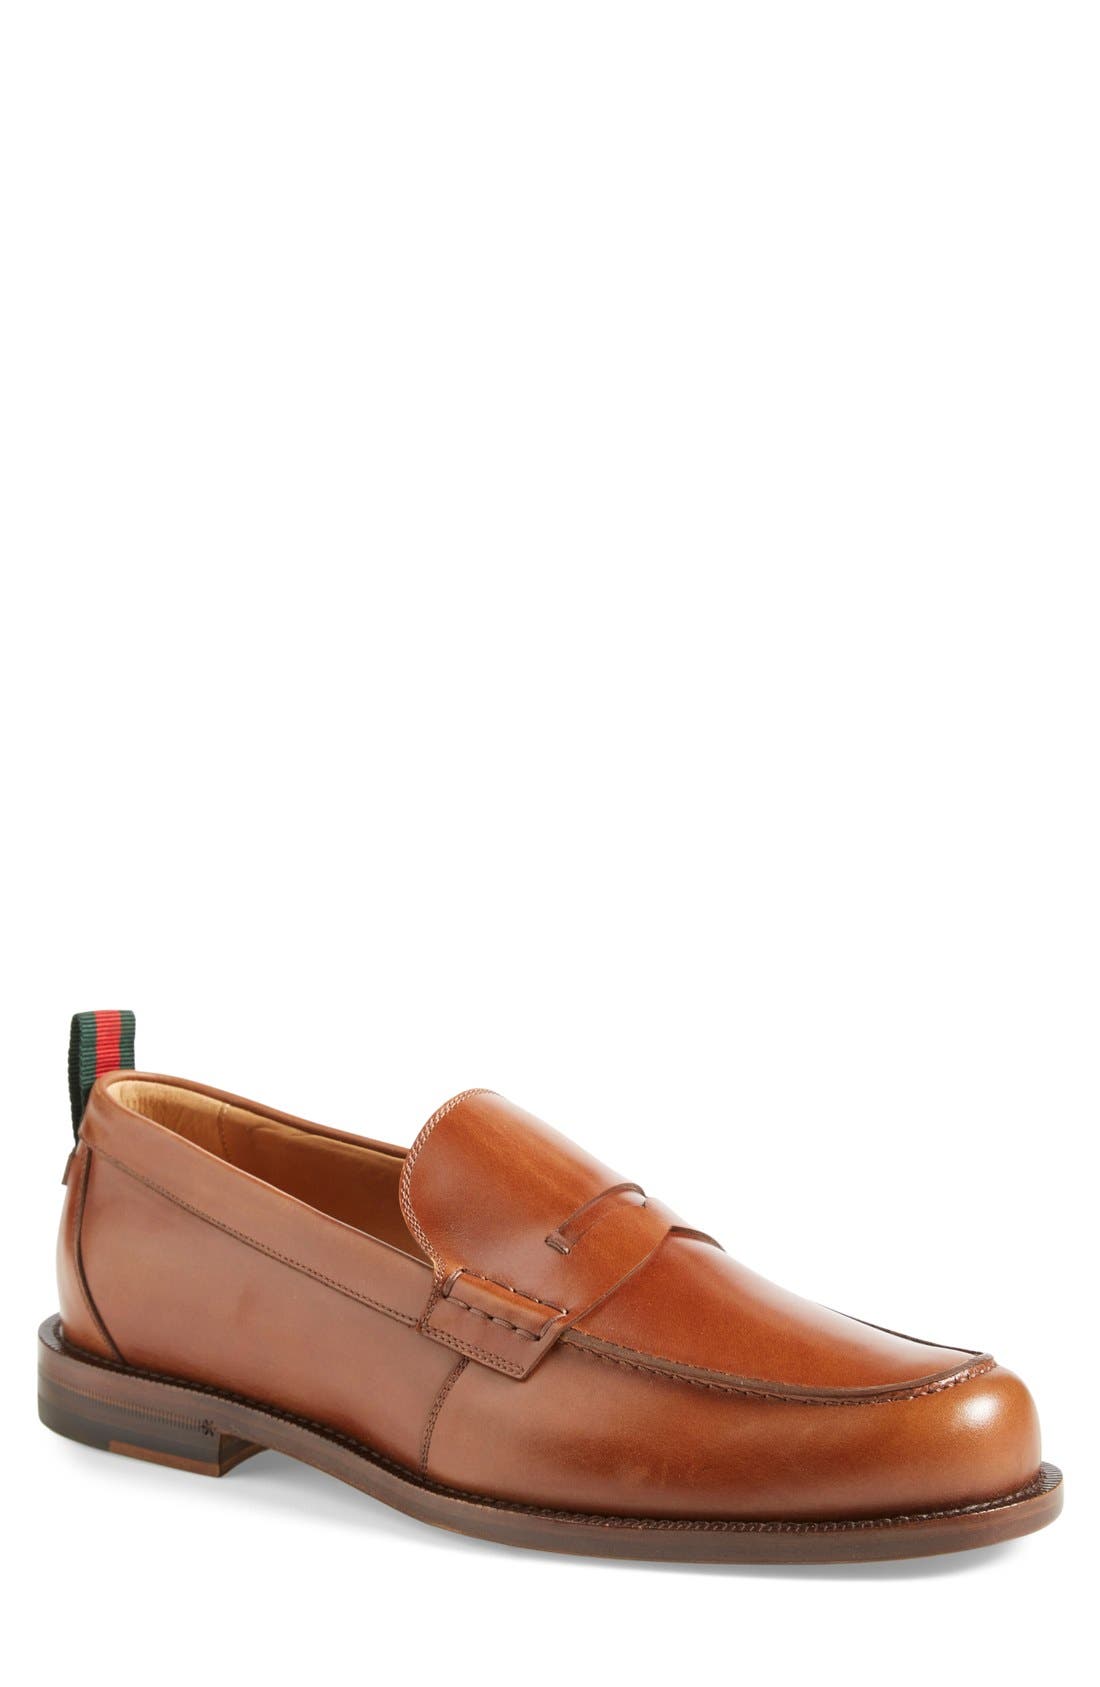 gucci mens penny loafers